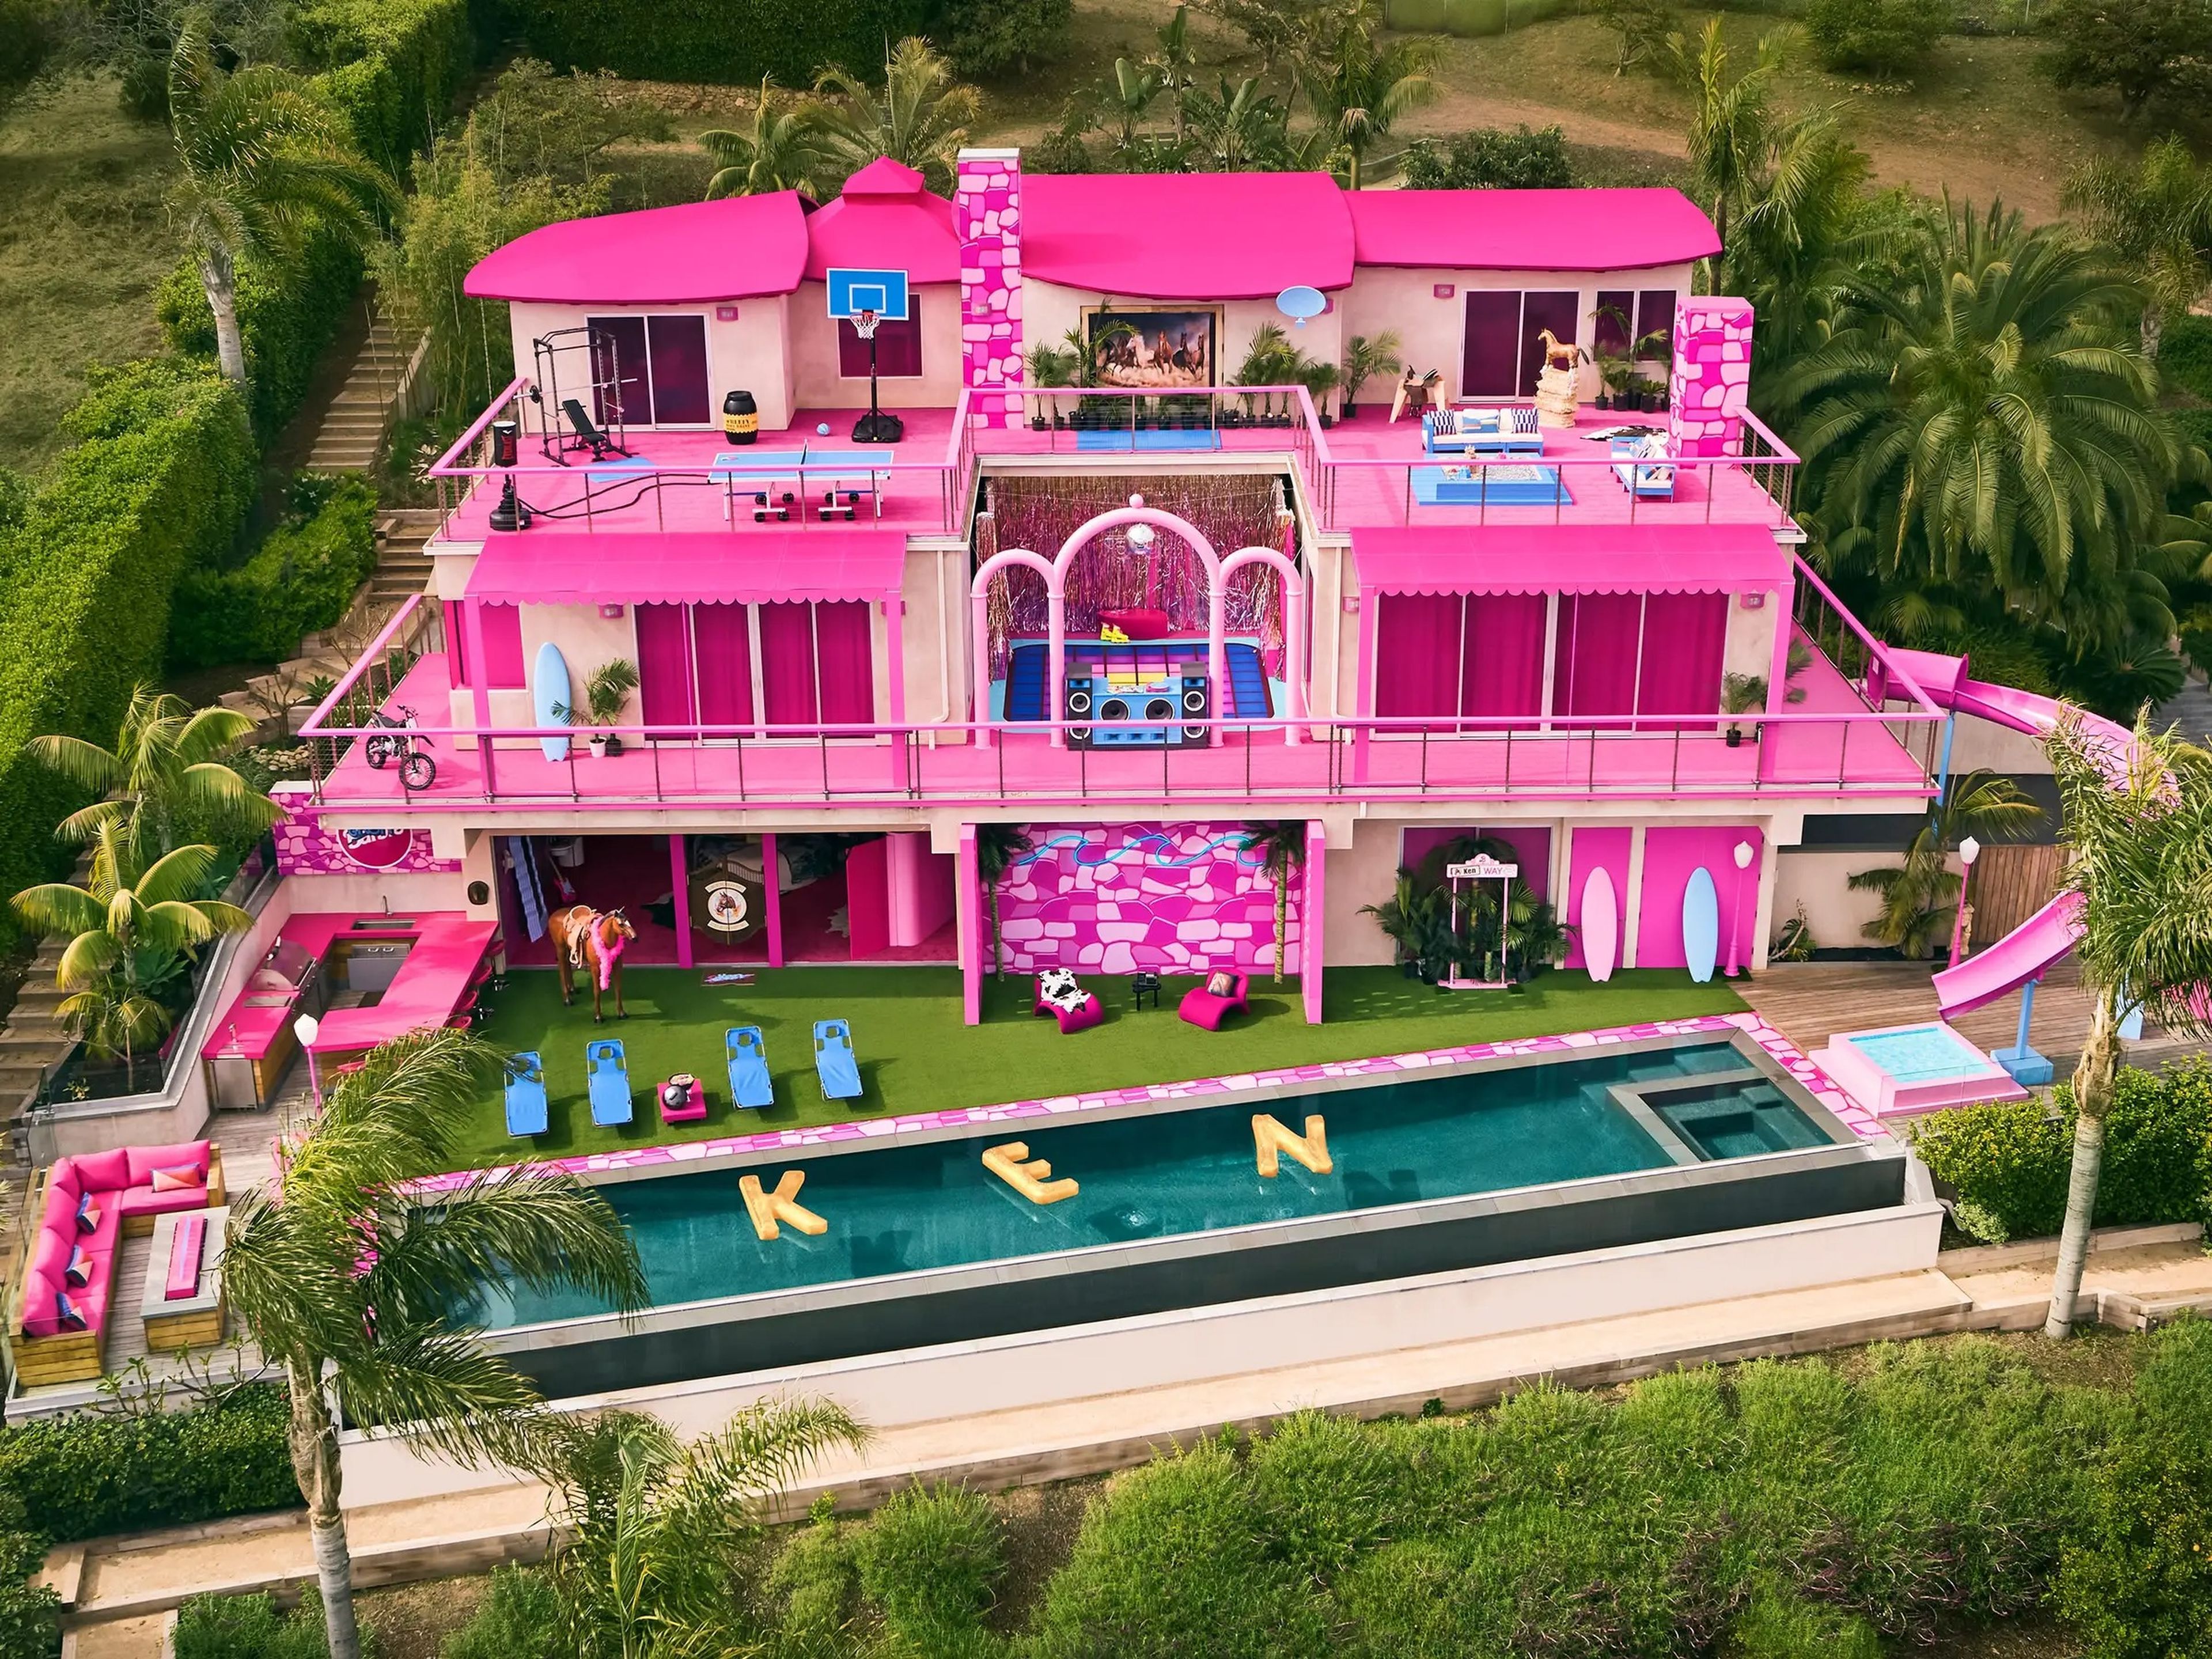 The exterior of a hot pink home in Malibu.